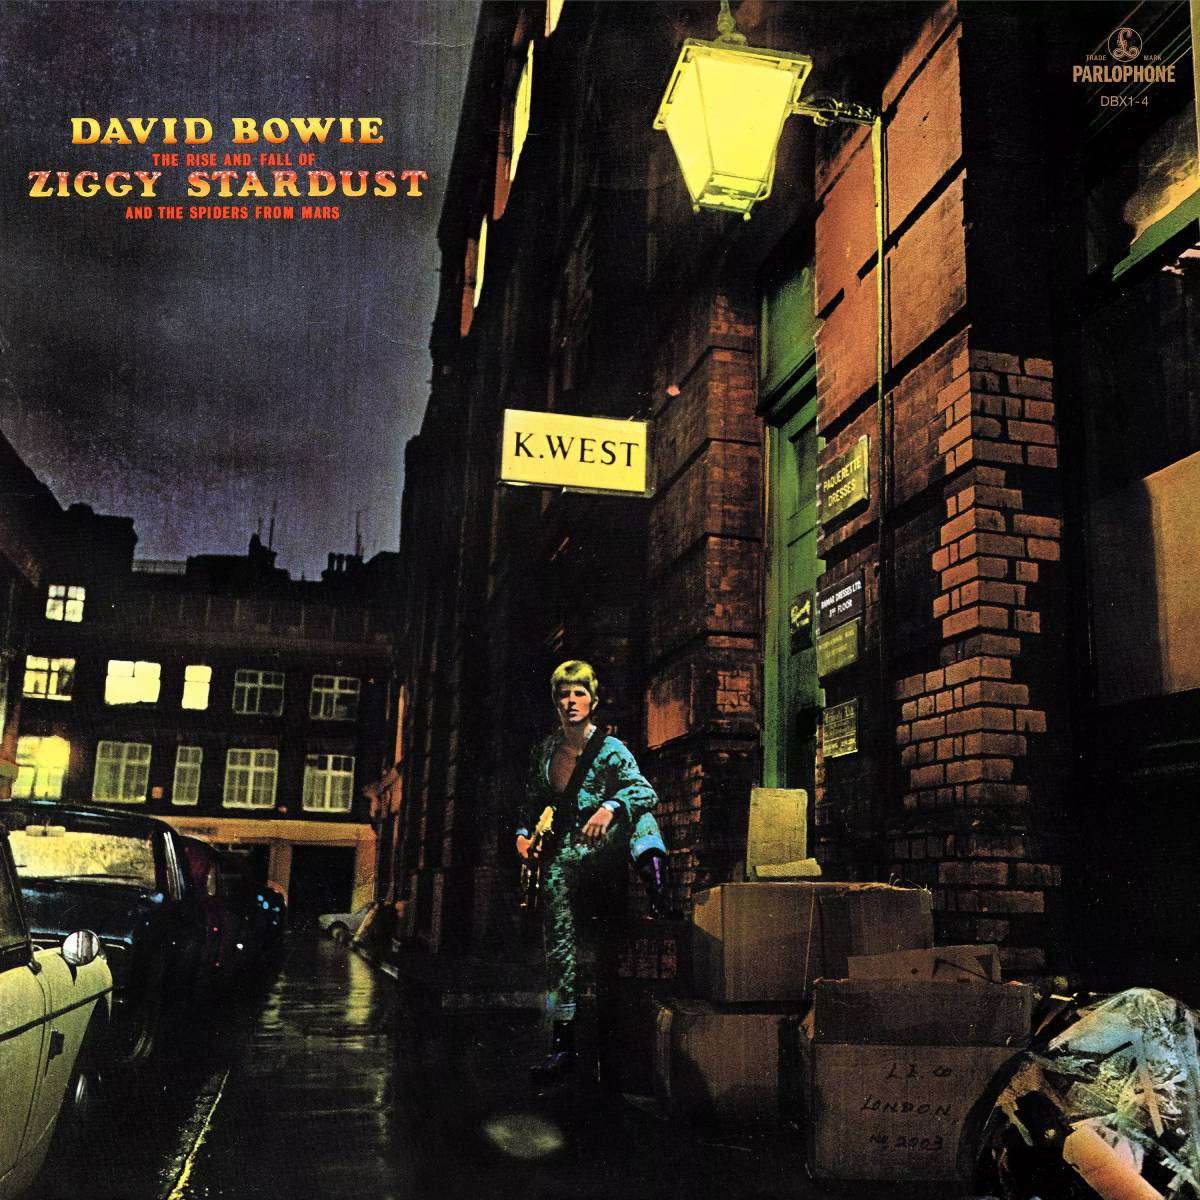 Couverture de l'album The Rise And Fall Of Ziggy Stardust And The Spiders From Mars de David Bowie.